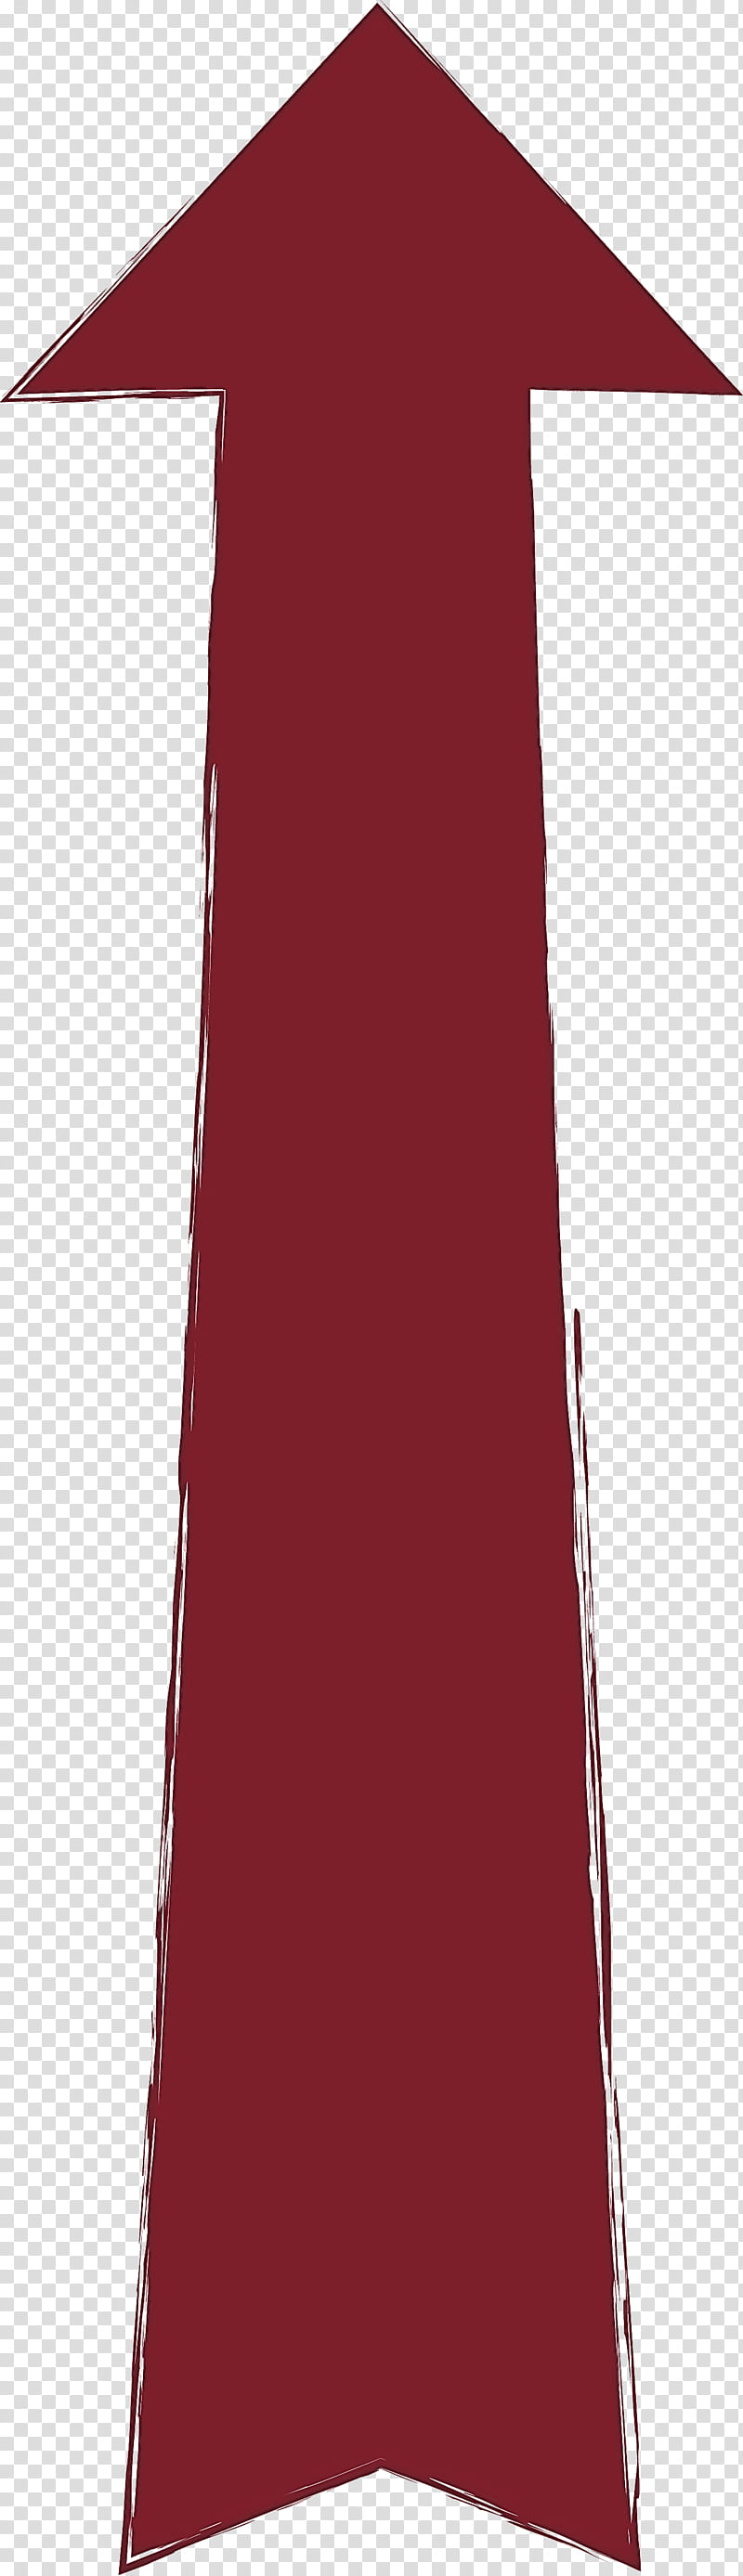 Rising Arrow, Red, Maroon, Tie, Linens, Rectangle transparent background PNG clipart